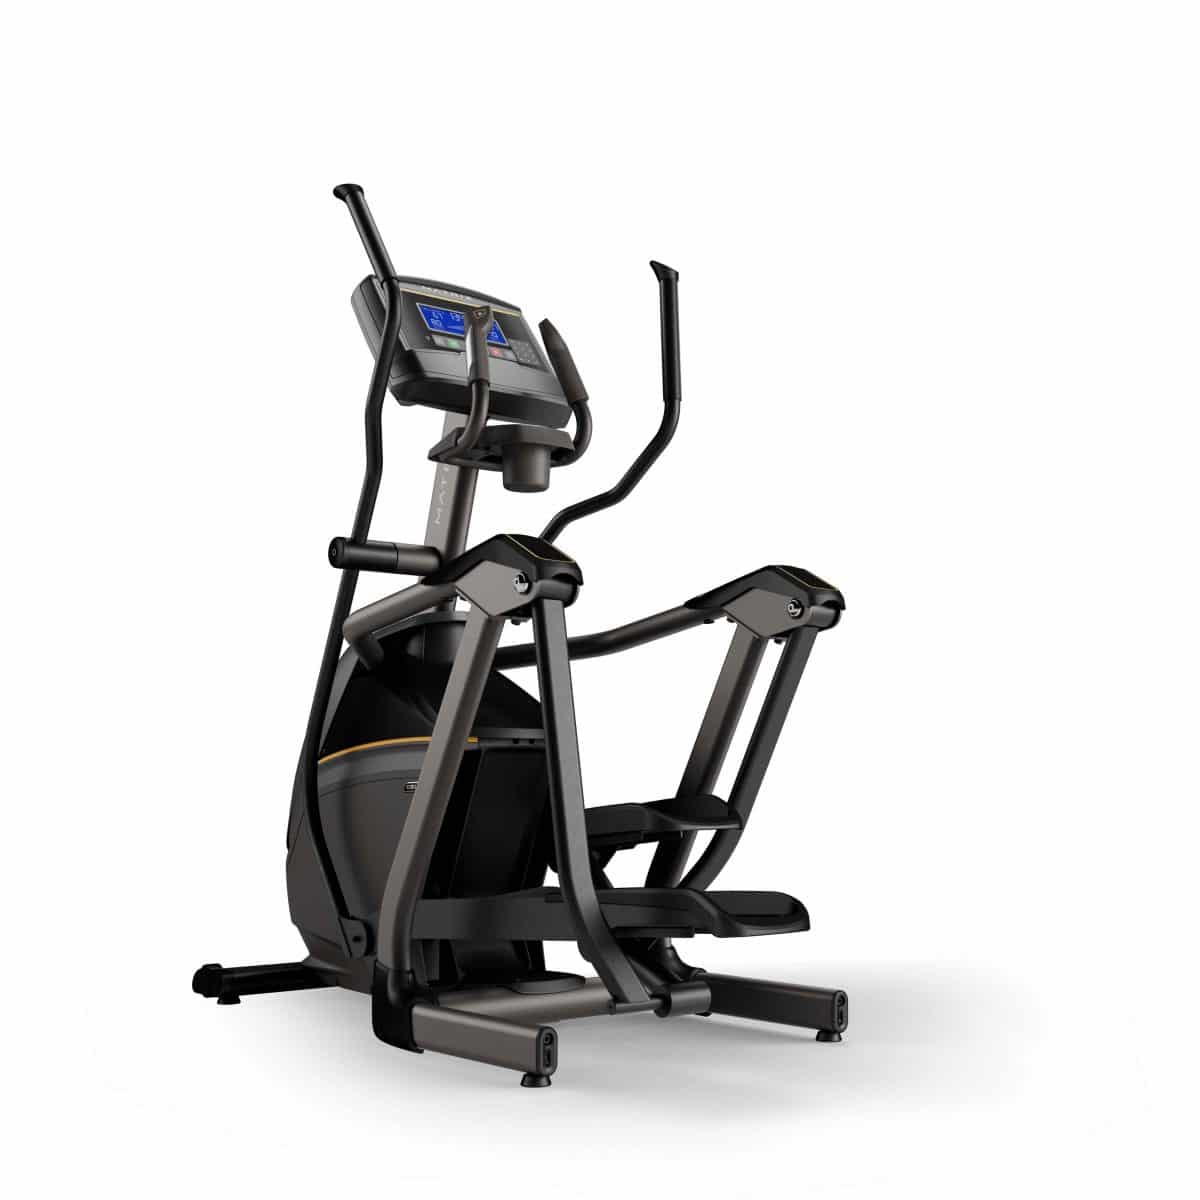 An exercise machine with a monitor on it